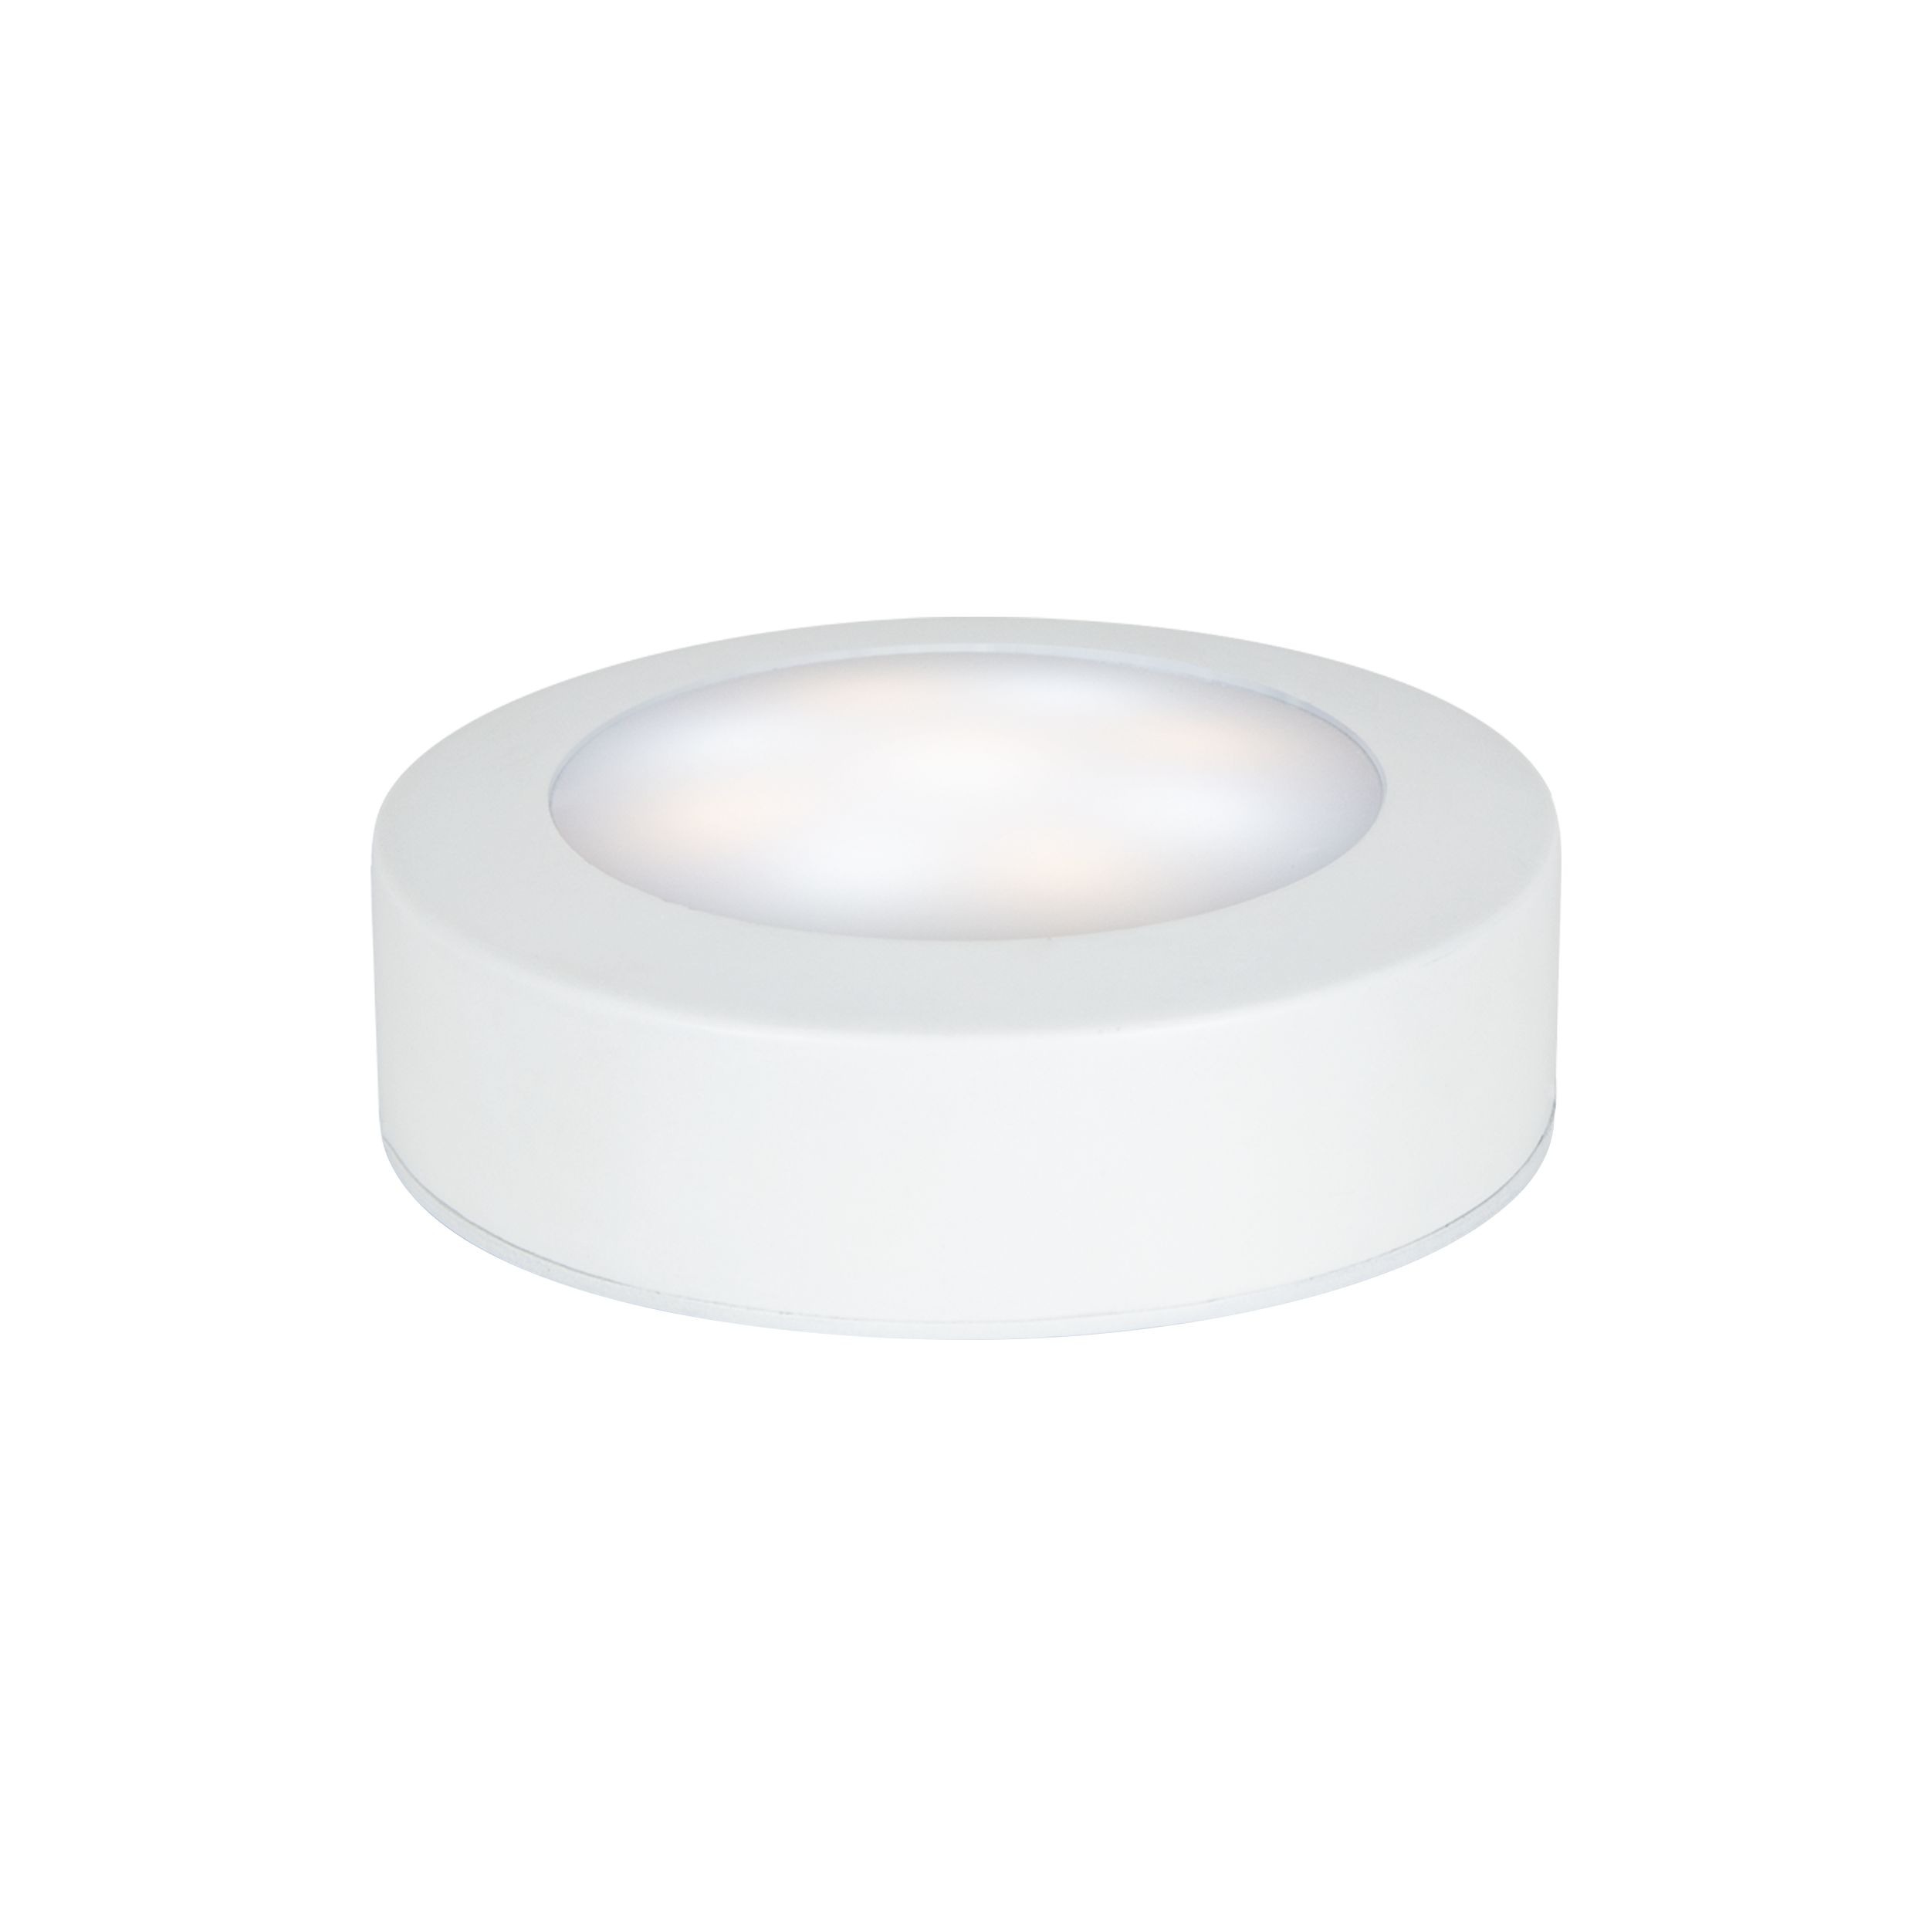 GoodHome BLY White Battery-powered LED Under cabinet light IP20 (L)80mm (W)25mm, Pack of 3